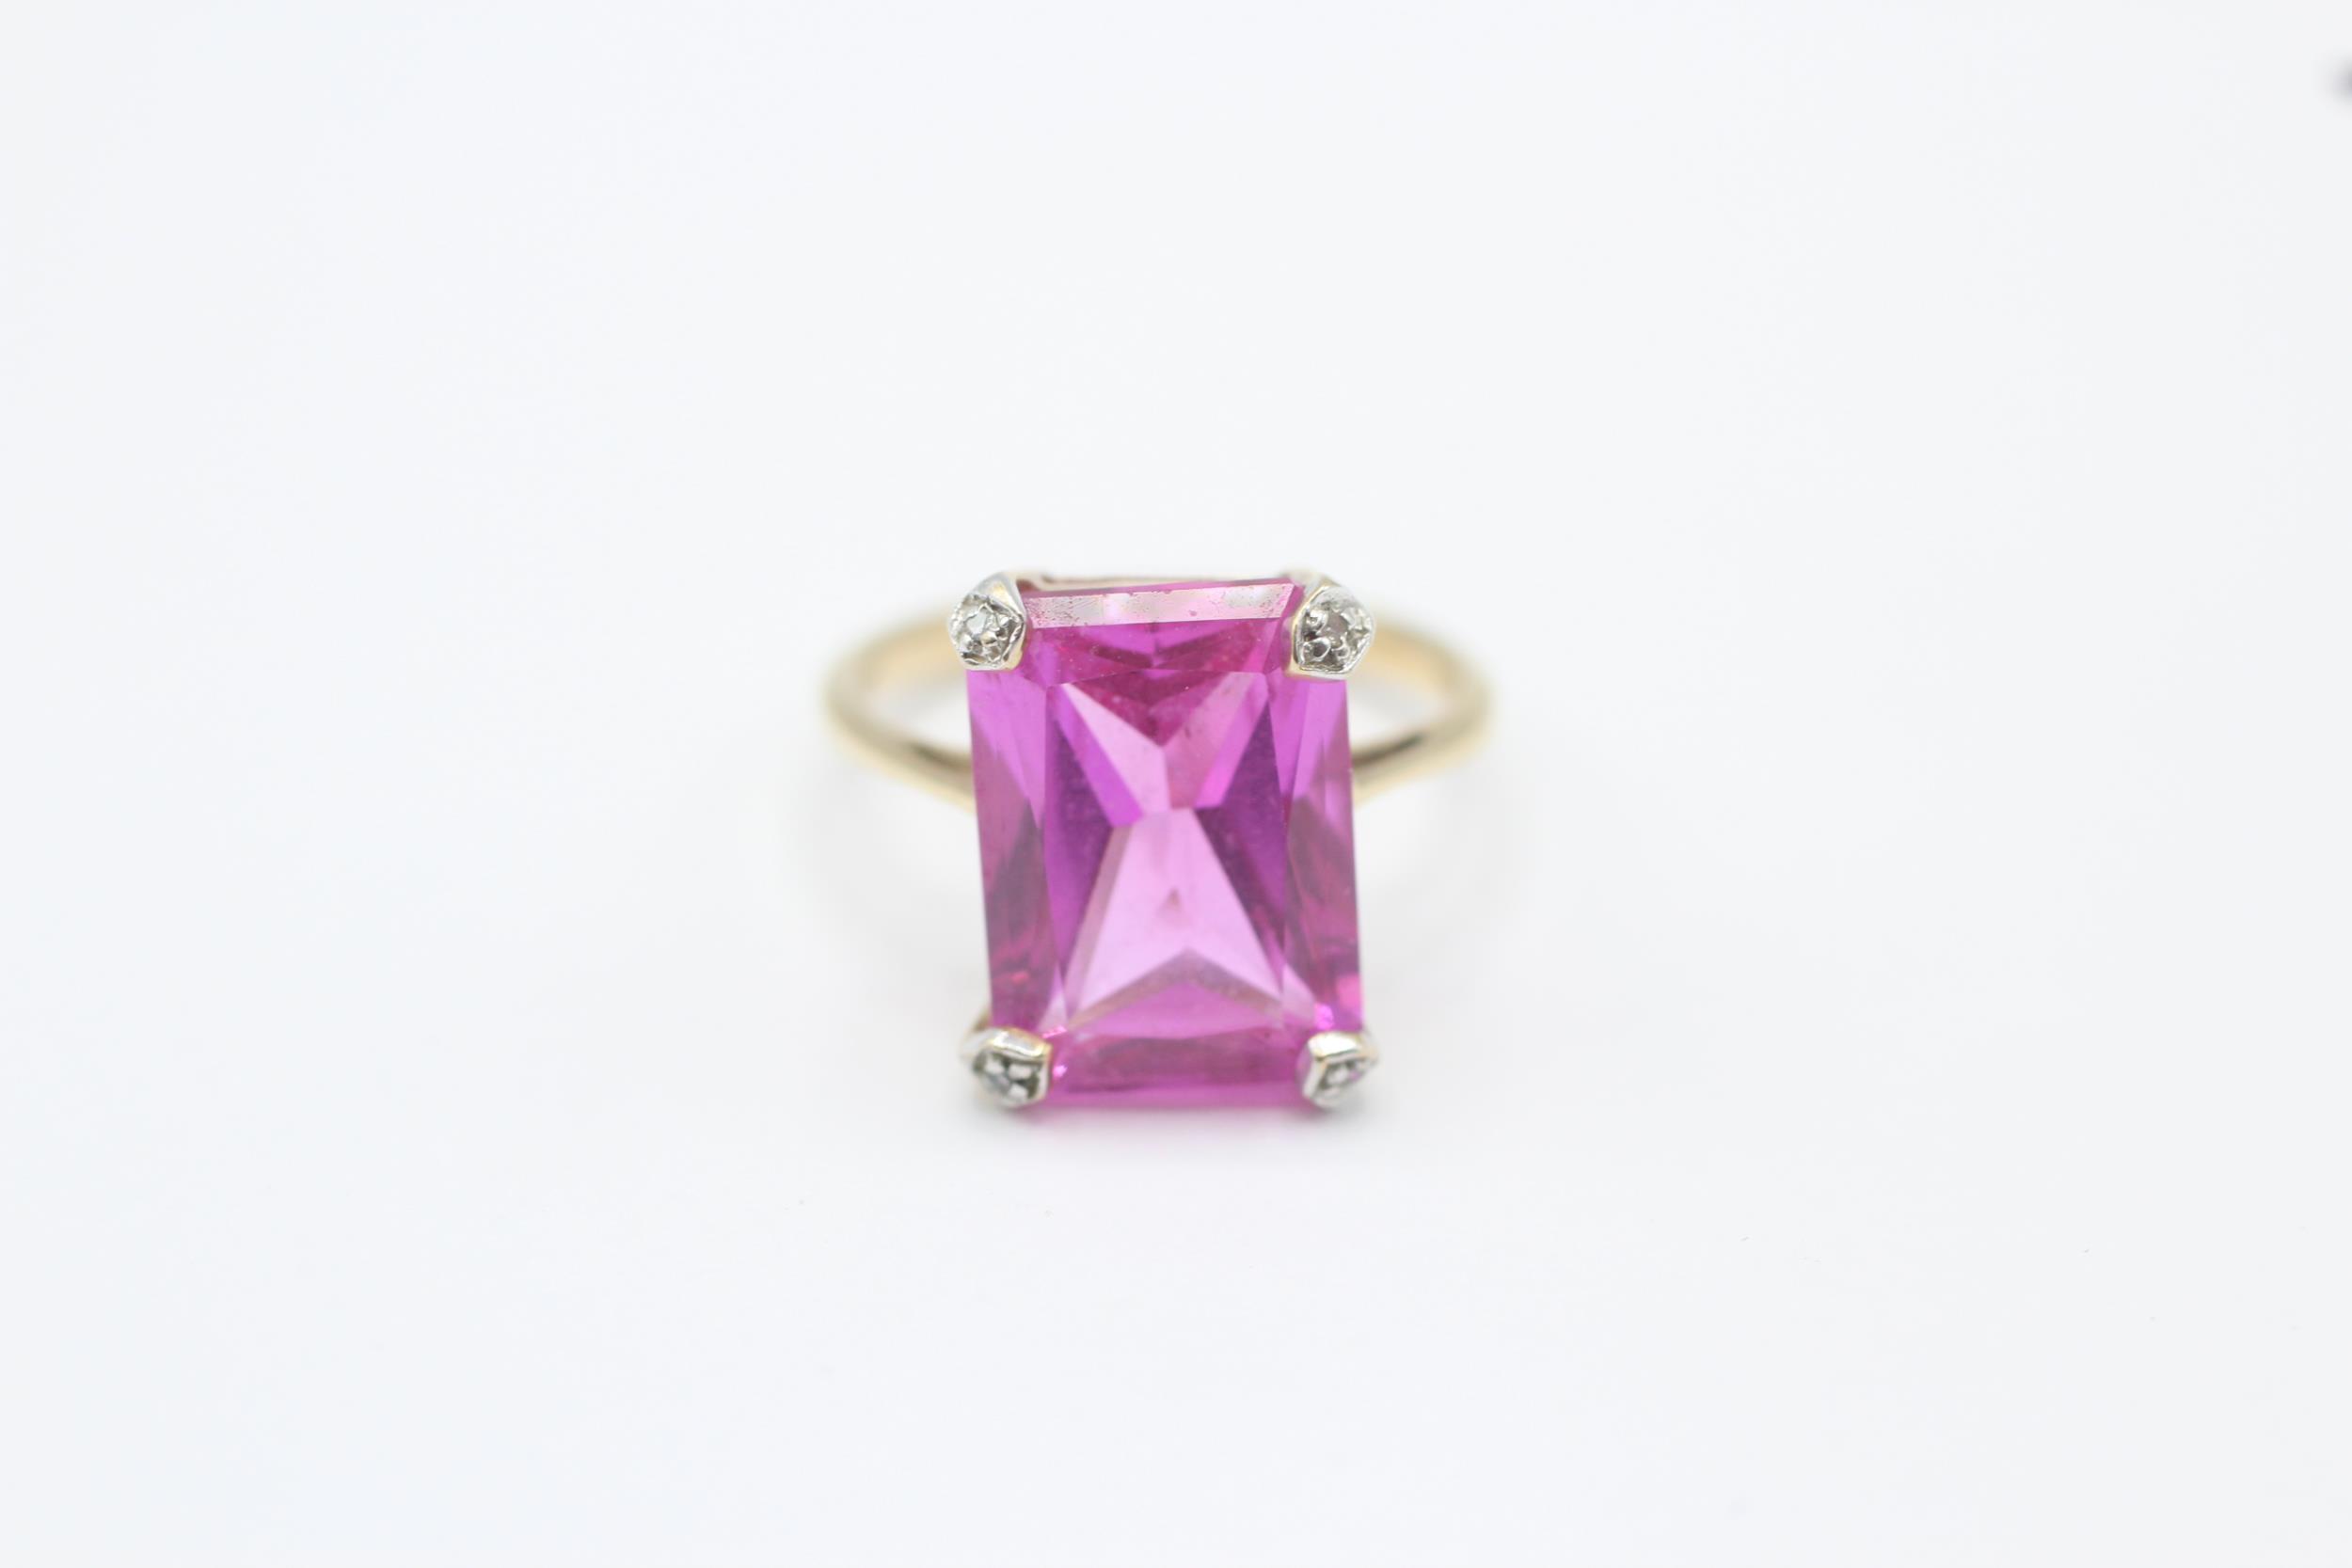 9ct gold pink gemstone and diamond cocktail ring Size N 3.9 g - Image 2 of 6